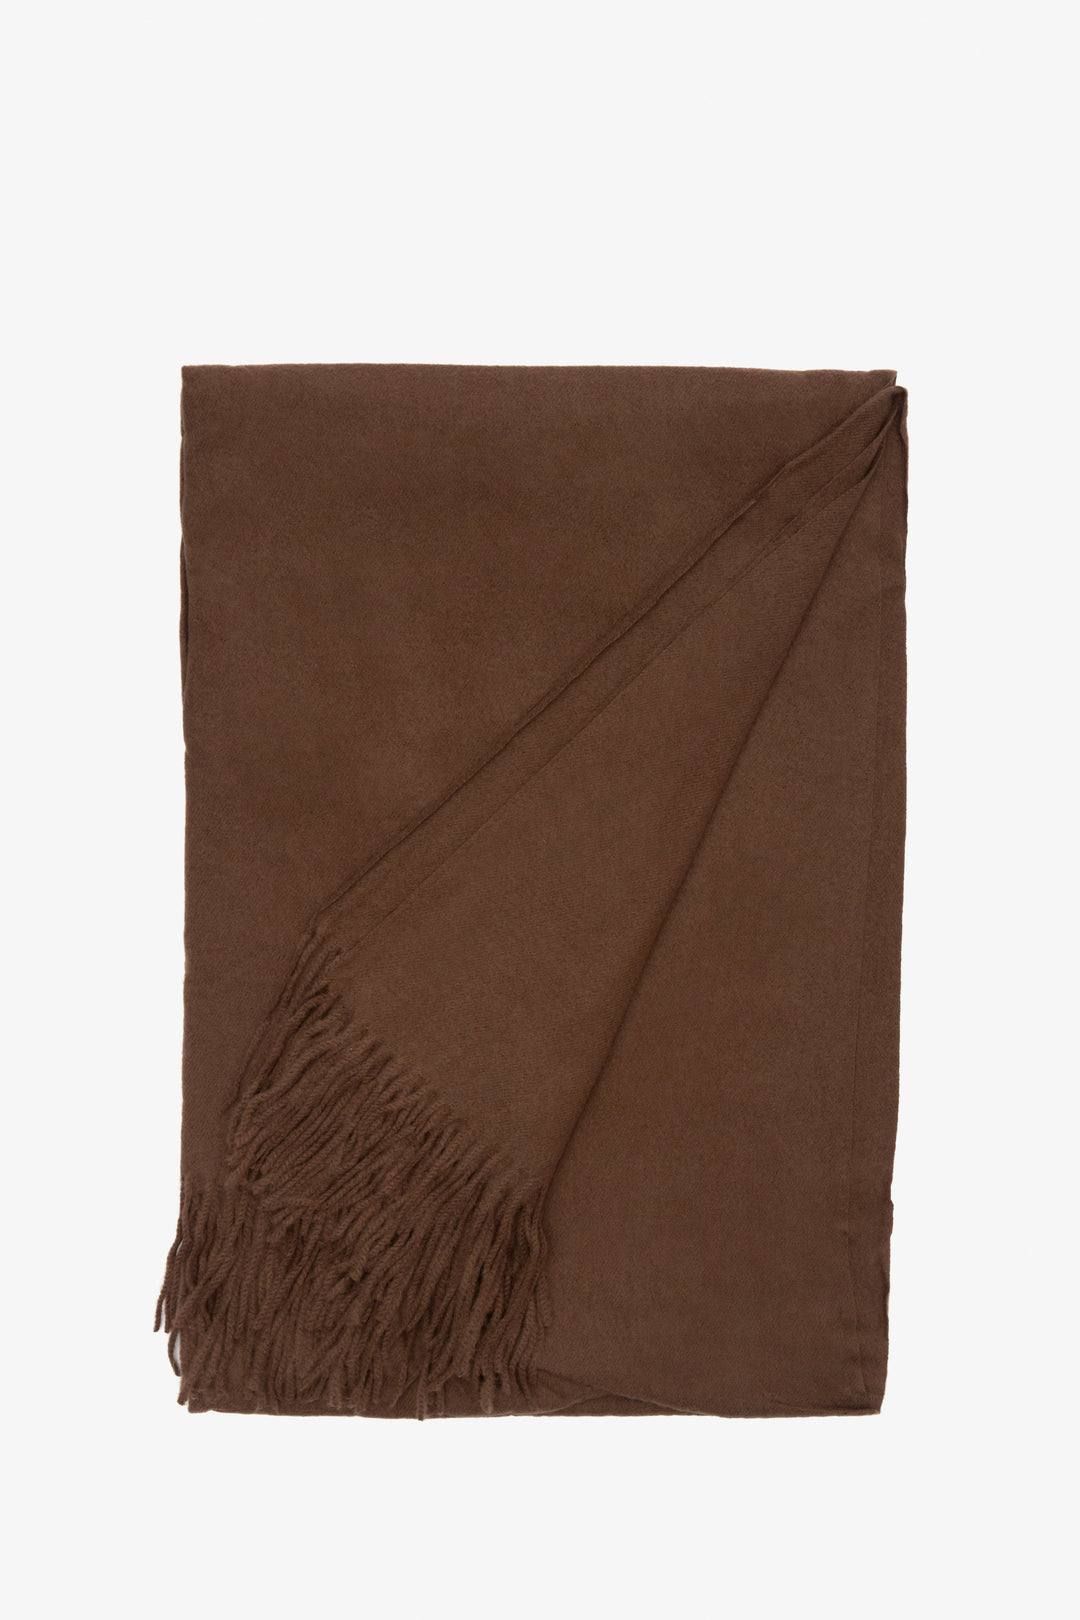 Stylish women's scarf with fringes in dark brown by Estro.